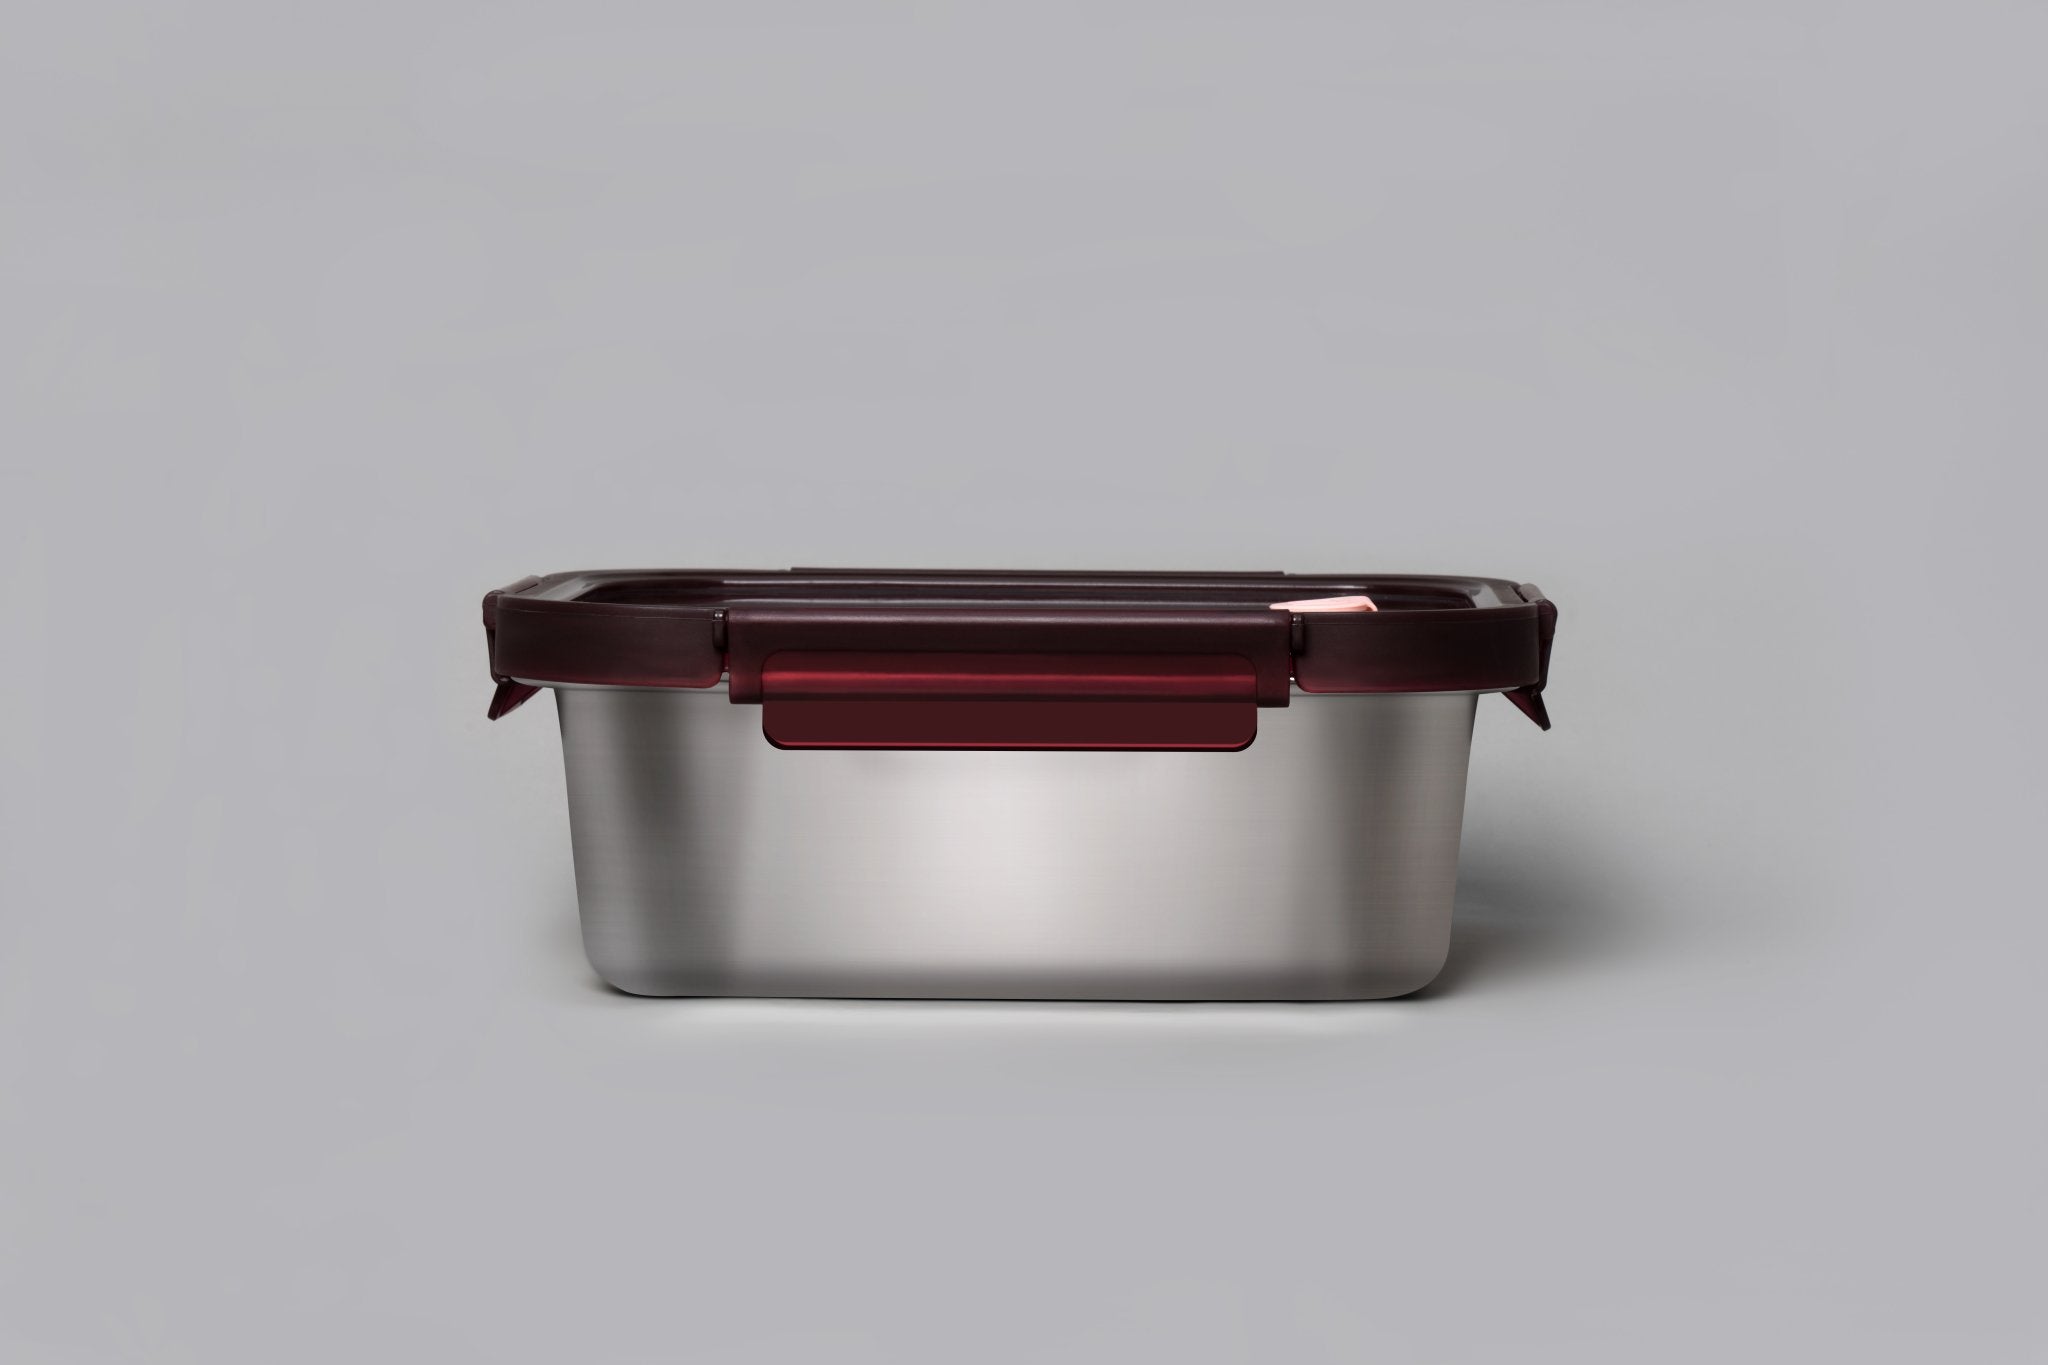 https://genicook.com/cdn/shop/products/rectangular-microwave-safe-stainless-steel-container-800-1200-or-1800-mlgenicooksiv800rc-rd-502933.jpg?v=1699599722